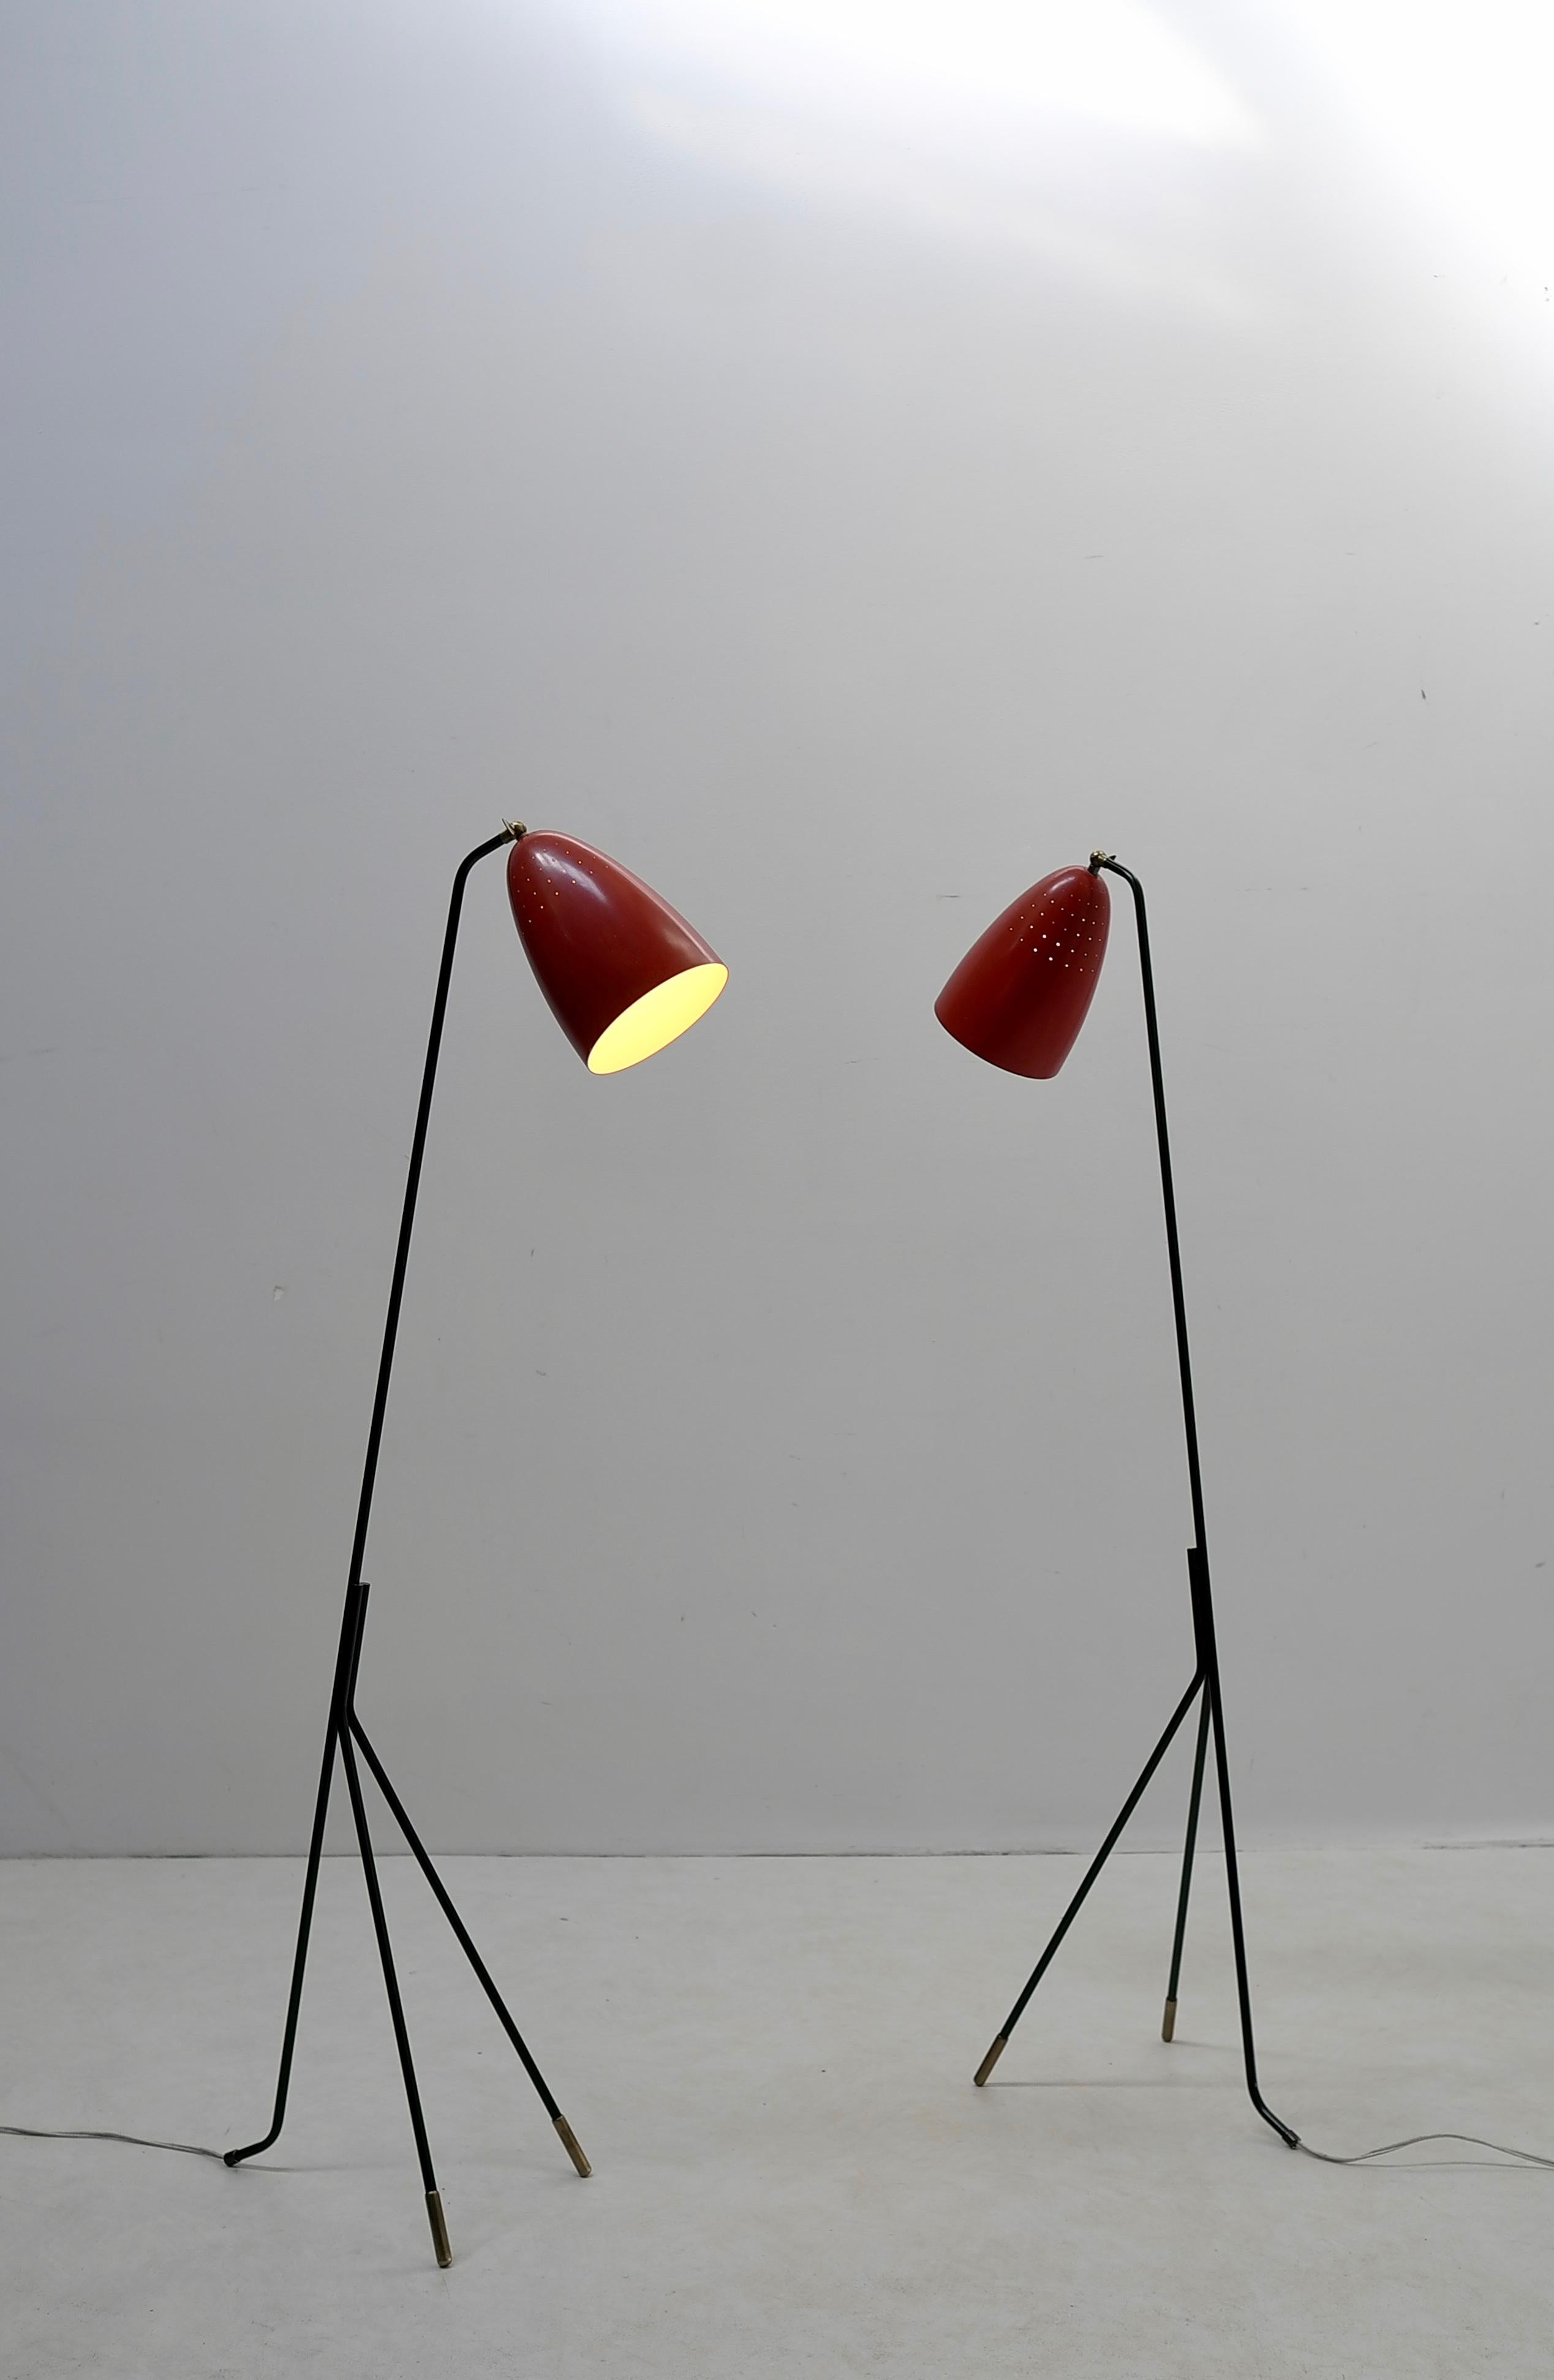 Pair of Red Danish Grasshopper Floor Lamps by Svend Aage Holm Sørensen In Good Condition For Sale In Den Haag, NL